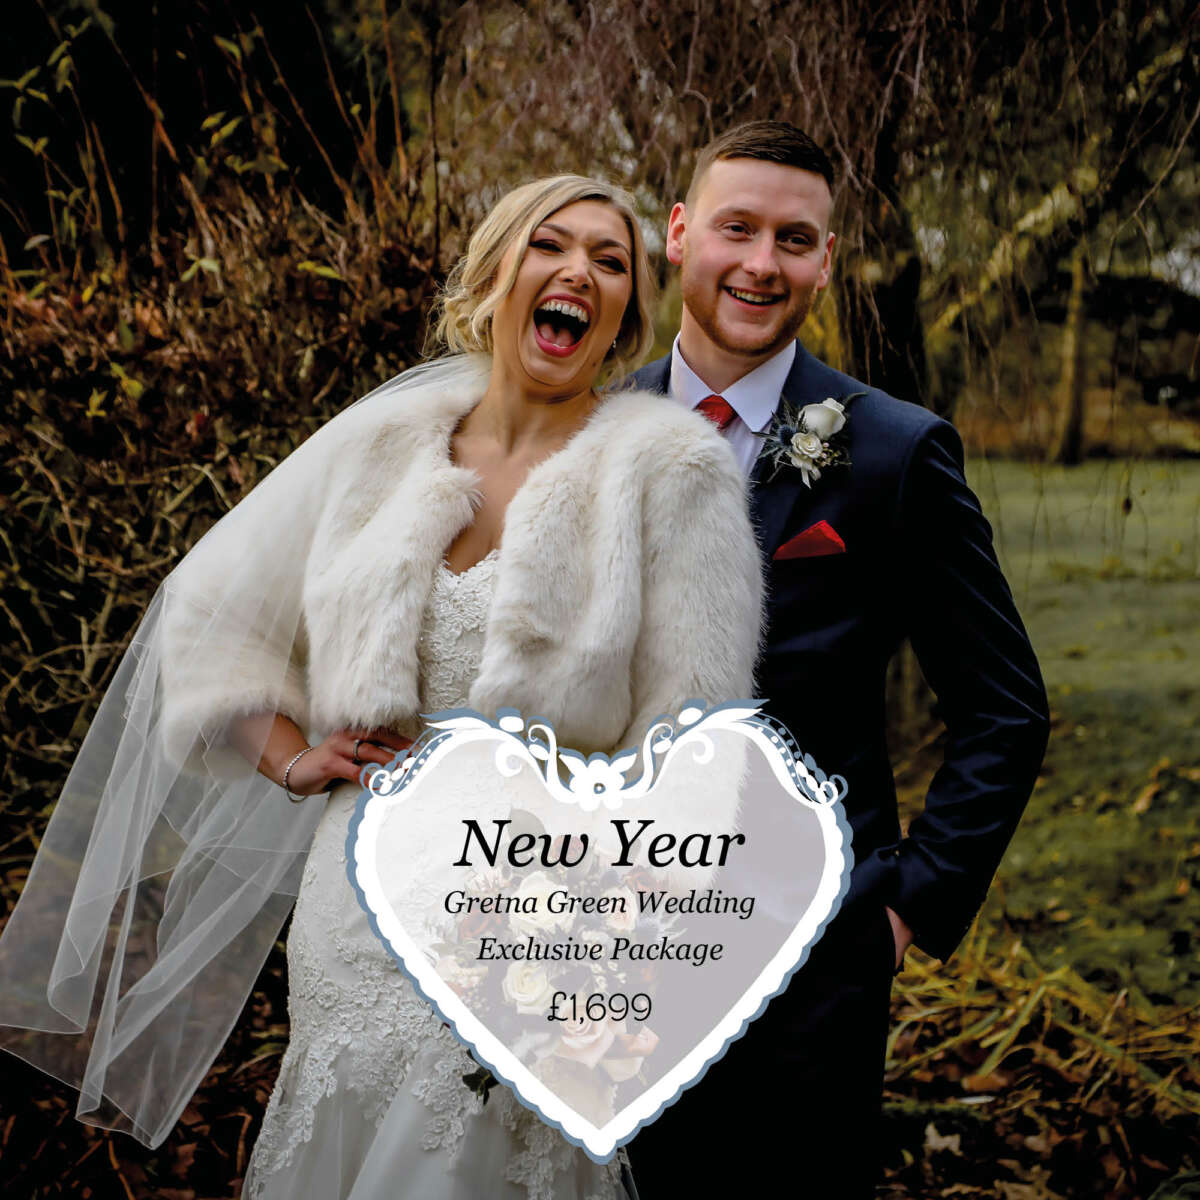 New Year Wedding Package at Gretna Hall